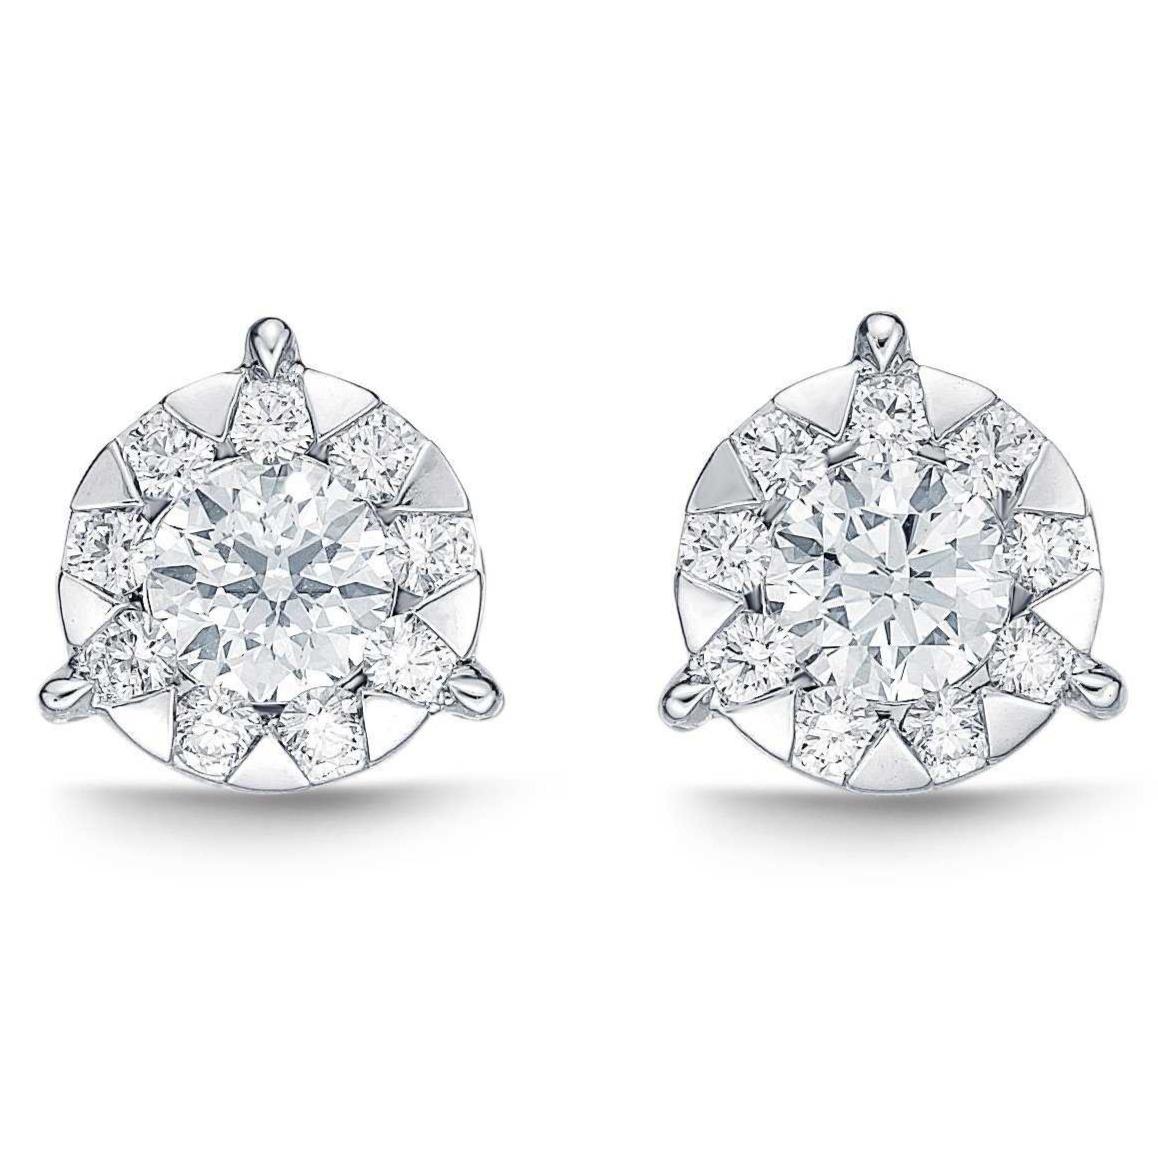 This Memoire Bouquet Collection Diamond Stud Earrings 1.33 ctw with 6 carats TW has been set in 18K White Gold, featuring 20 Round Brilliant Cut Diamonds. For its 1.33 ctw, each diamond offers the 